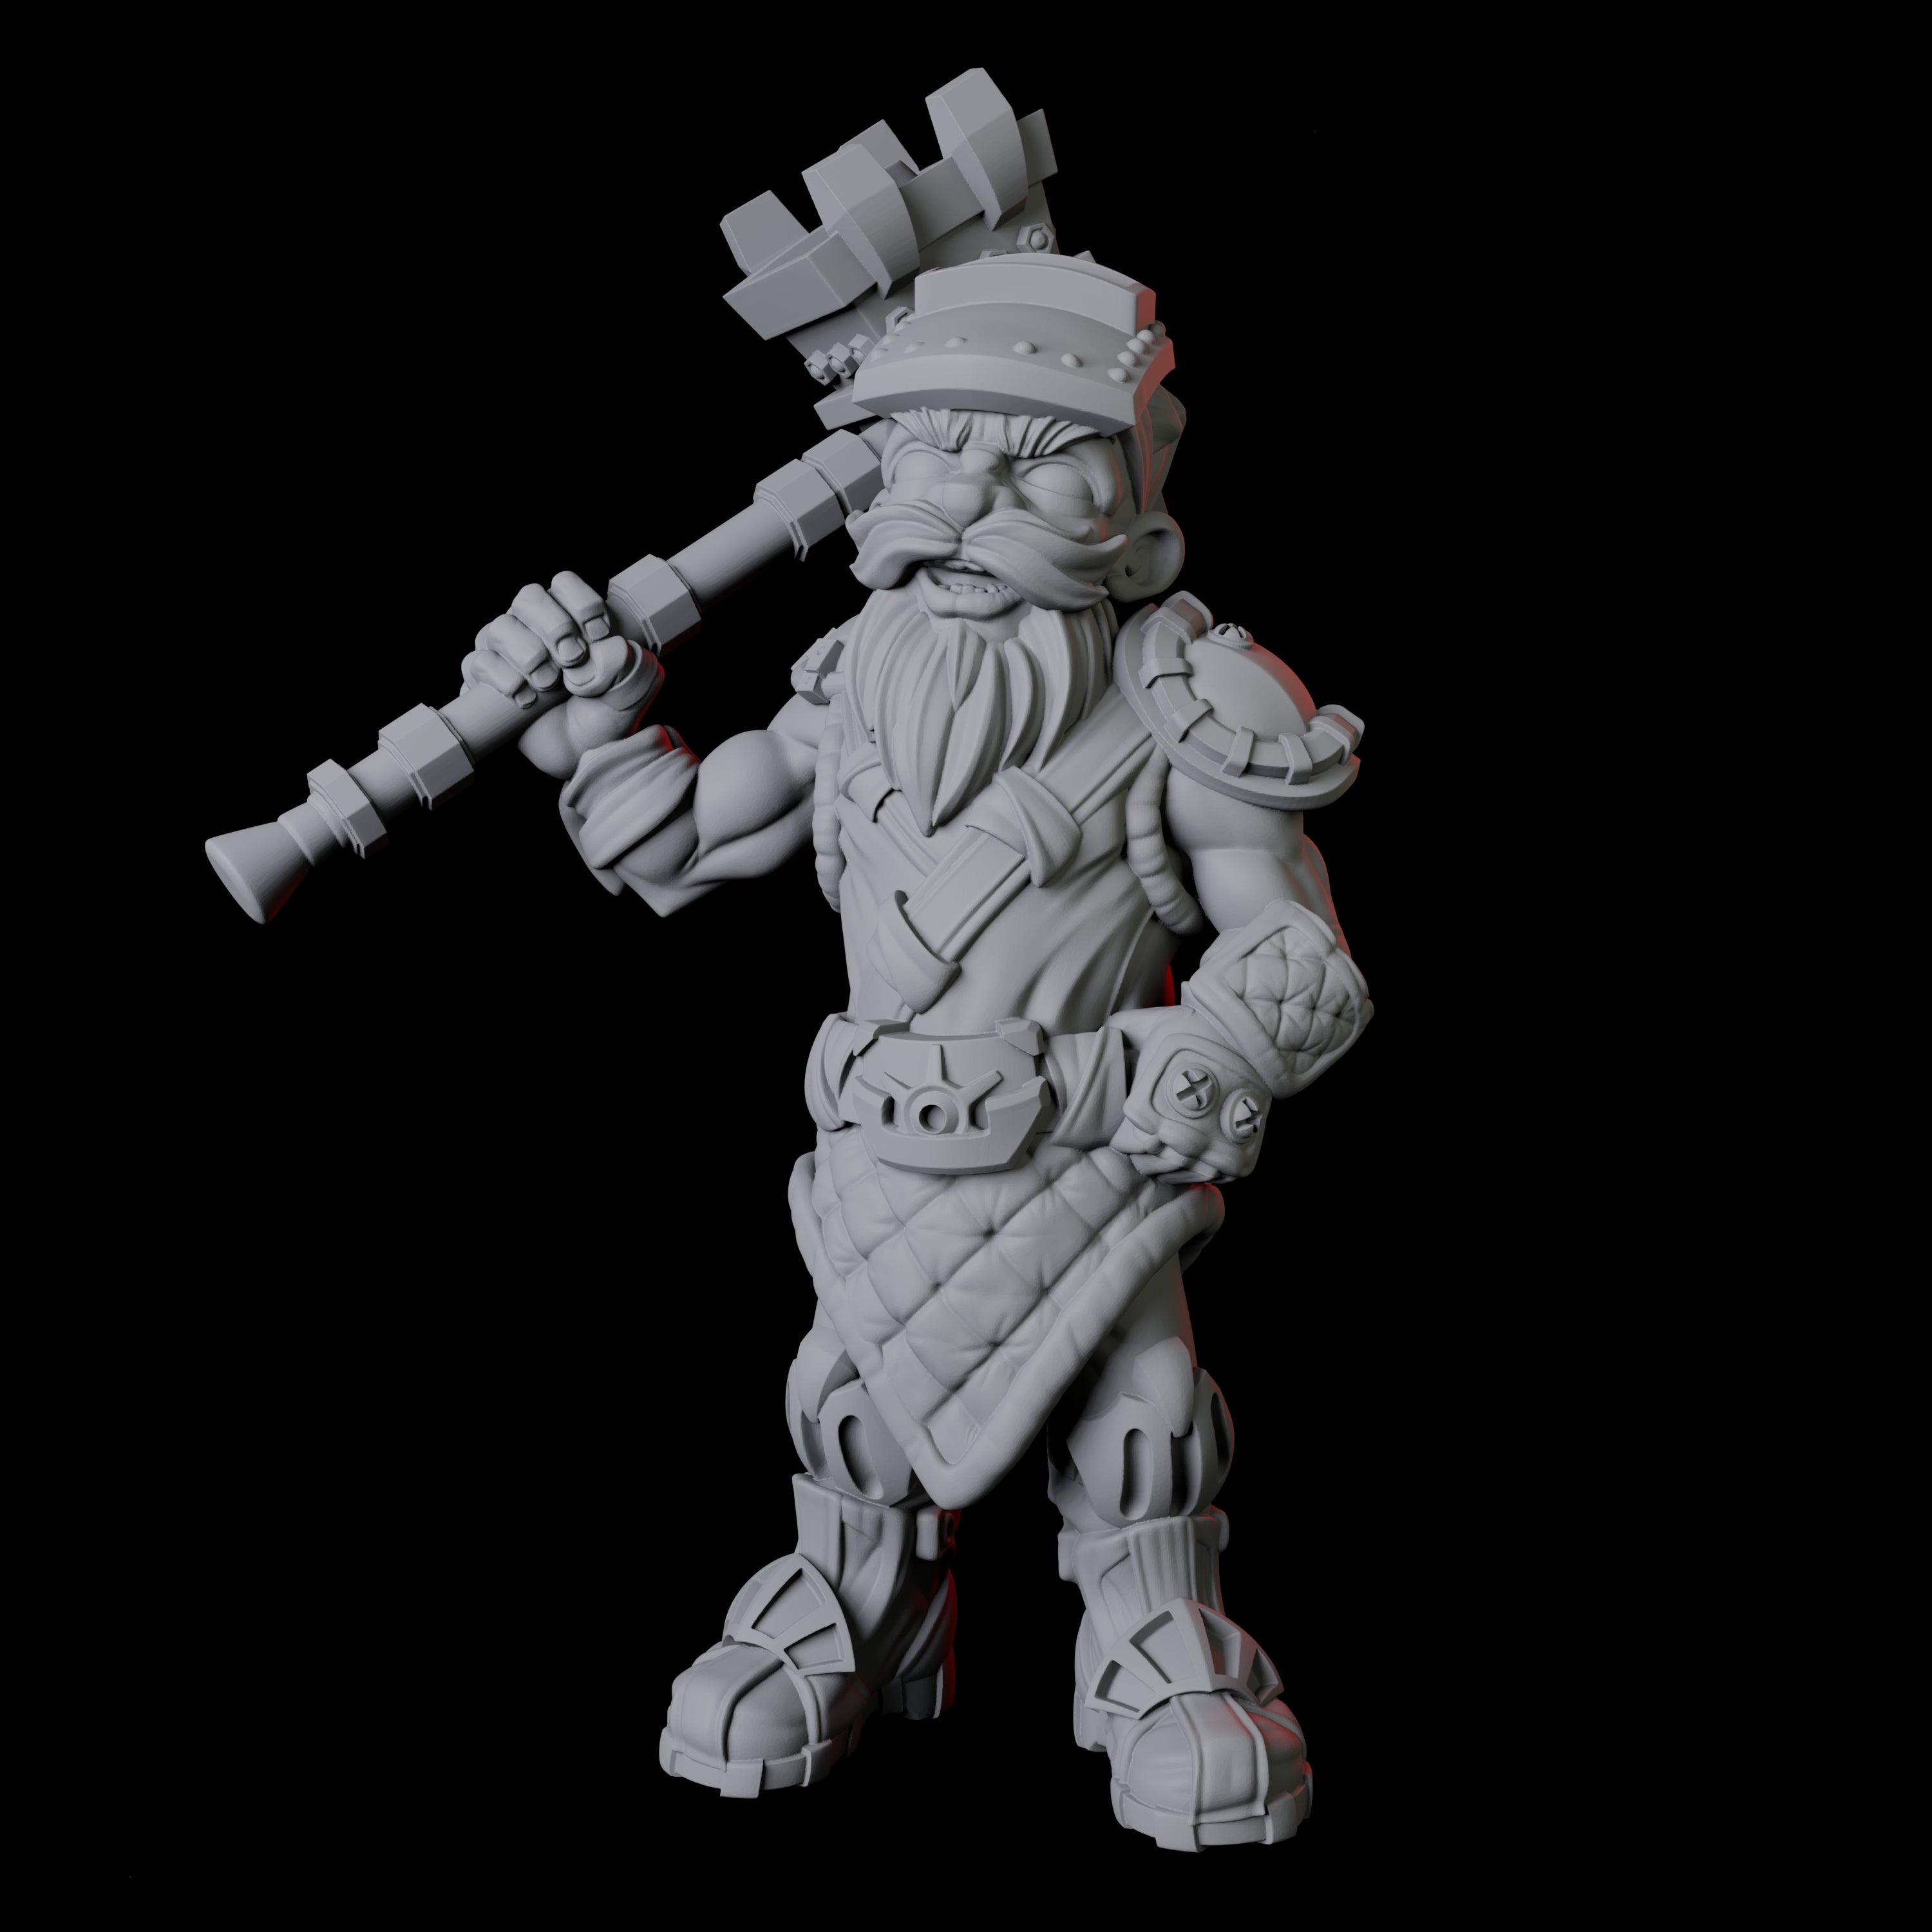 Gnome Artificer C Miniature for Dungeons and Dragons, Pathfinder or other TTRPGs